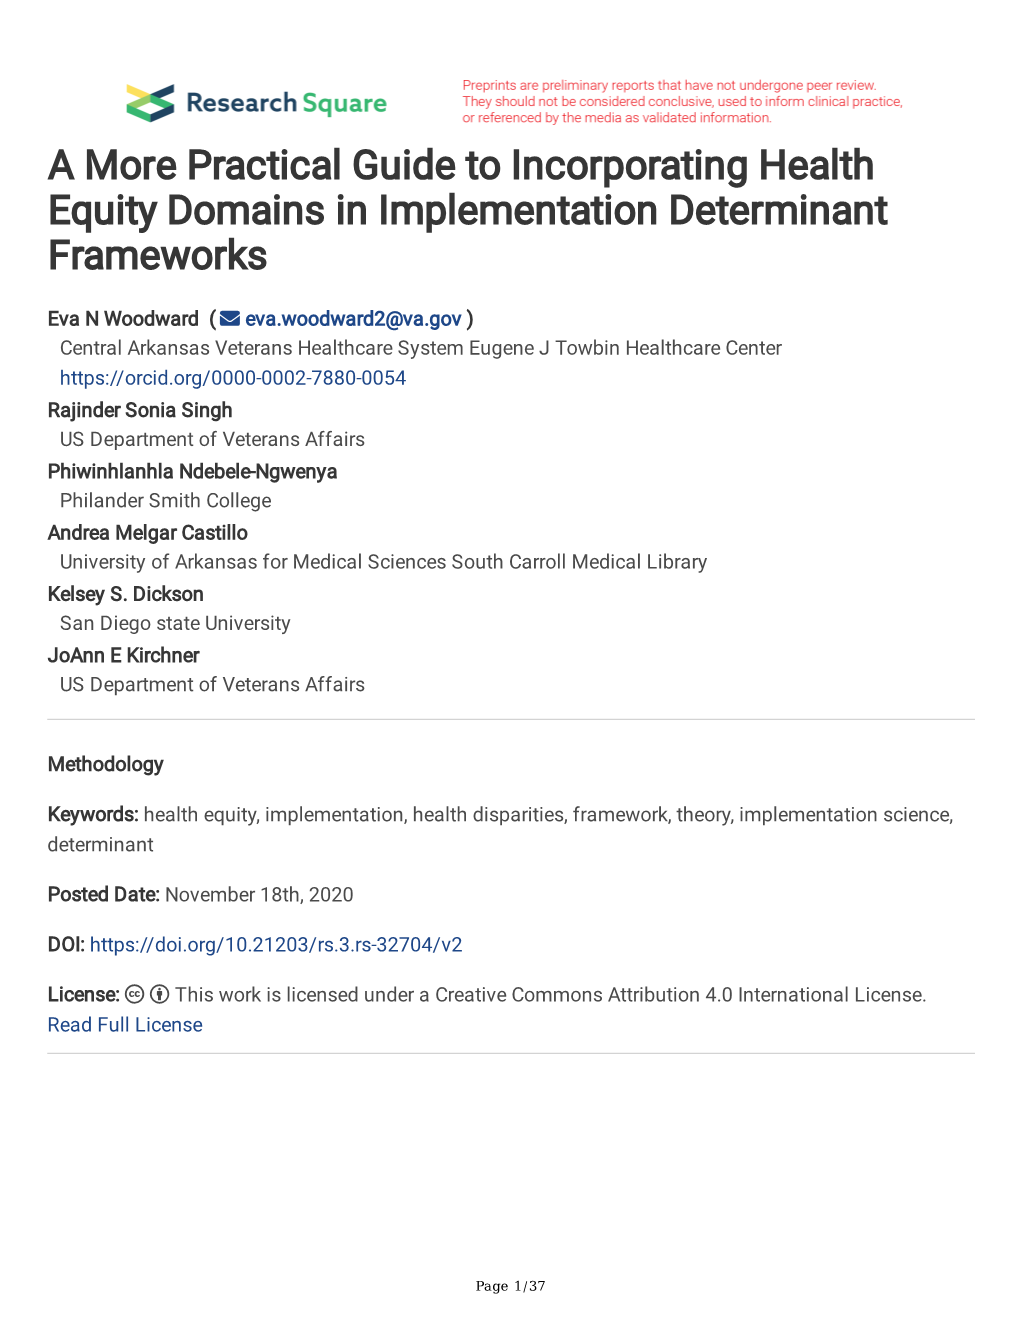 A More Practical Guide to Incorporating Health Equity Domains in Implementation Determinant Frameworks